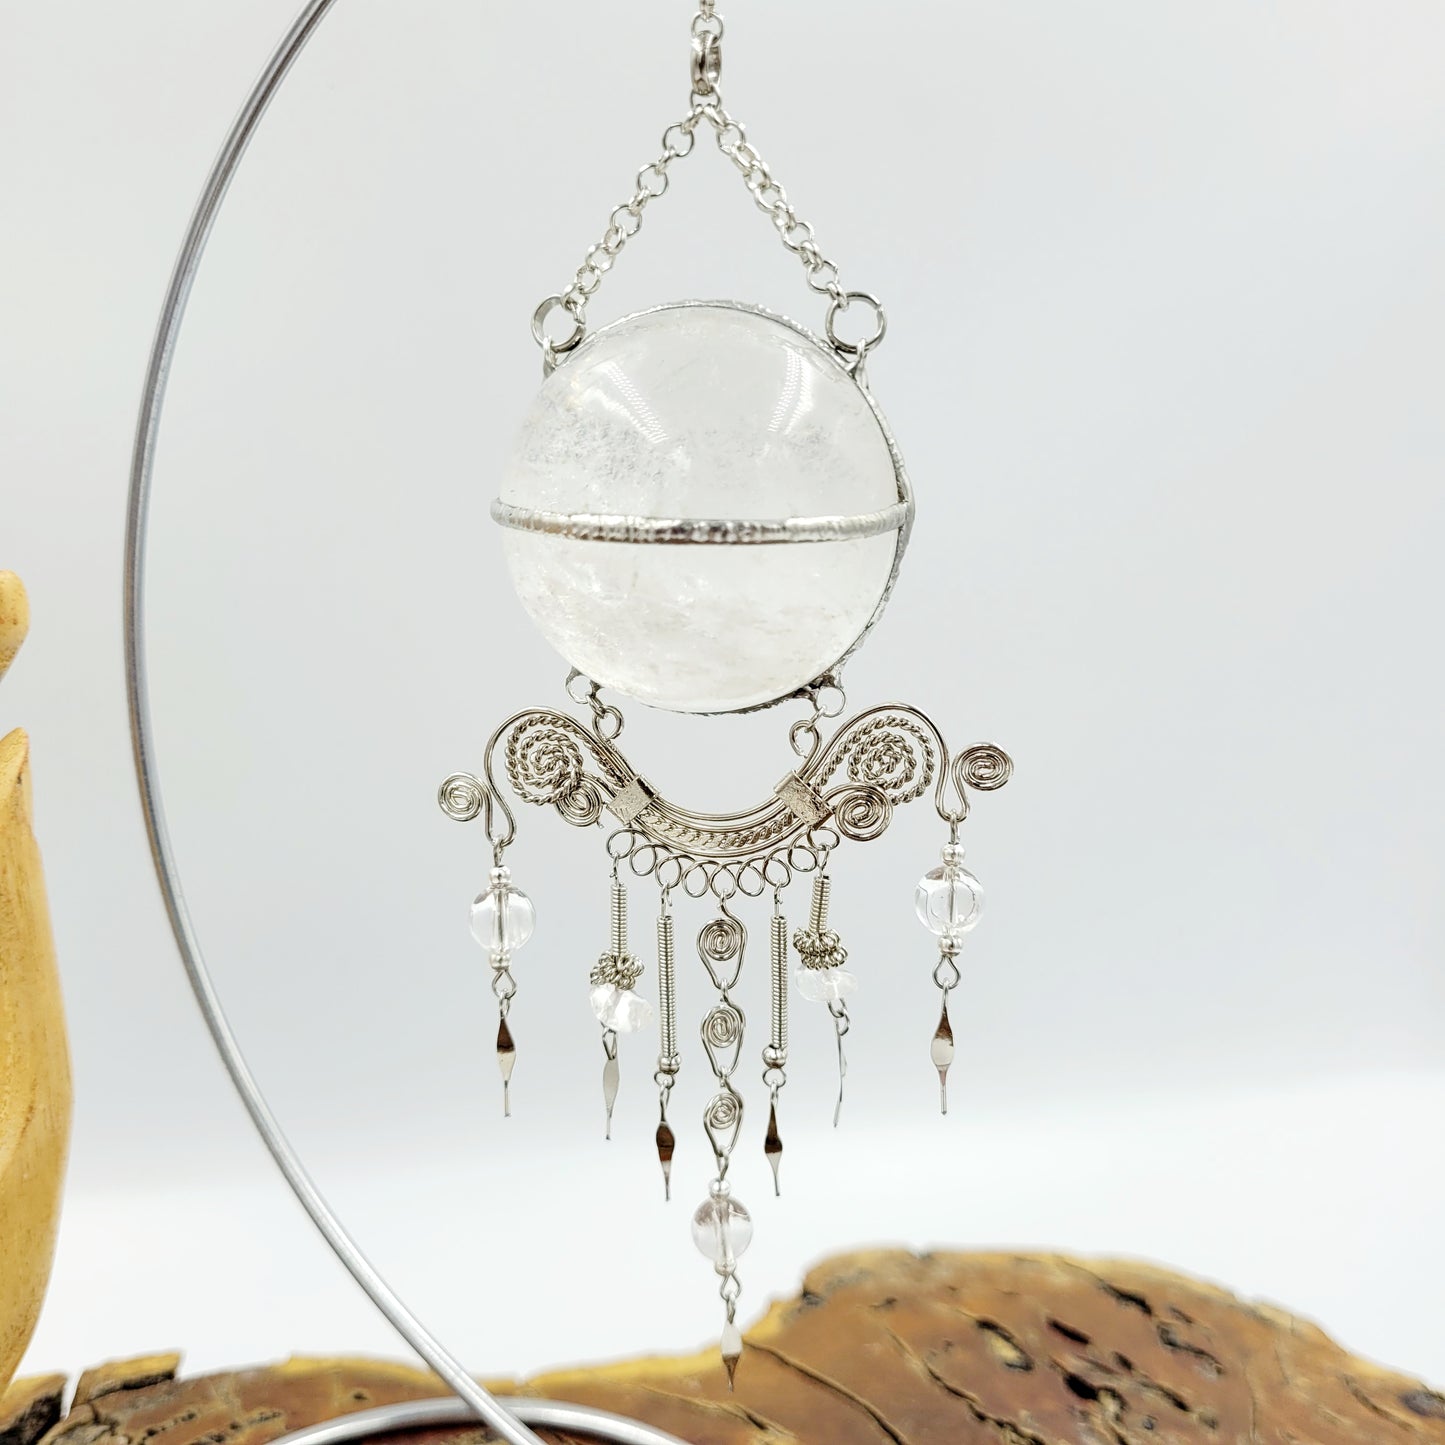 Clear Quartz Hanging Sphere with Stand